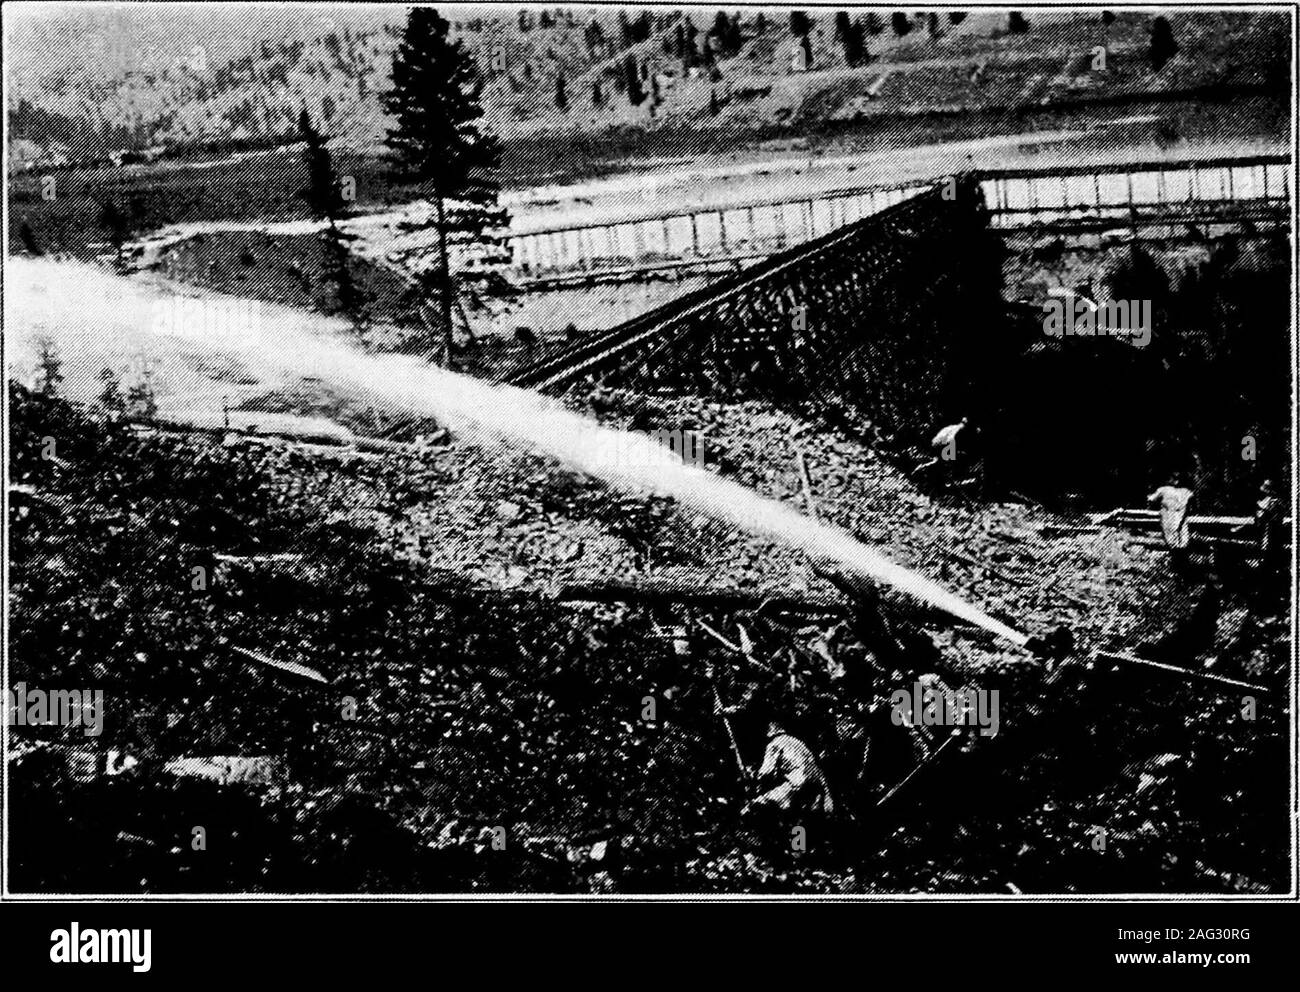 . Principles of irrigation engineering, arid lands, water supply, storage works, dams, canals, water rights and products. Fig. B.—Earth dam partly protected by heavy gravel on water side. Boise Project, Idaho. (Facing Page 214) Plate XIII. Fig. C-—Hydraulic construction of earth dam, giant in foreground washingearth and small rocks into flumes supported on trestles and conveying materialsto site of dam. Okanogan Project, Wash. Stock Photo